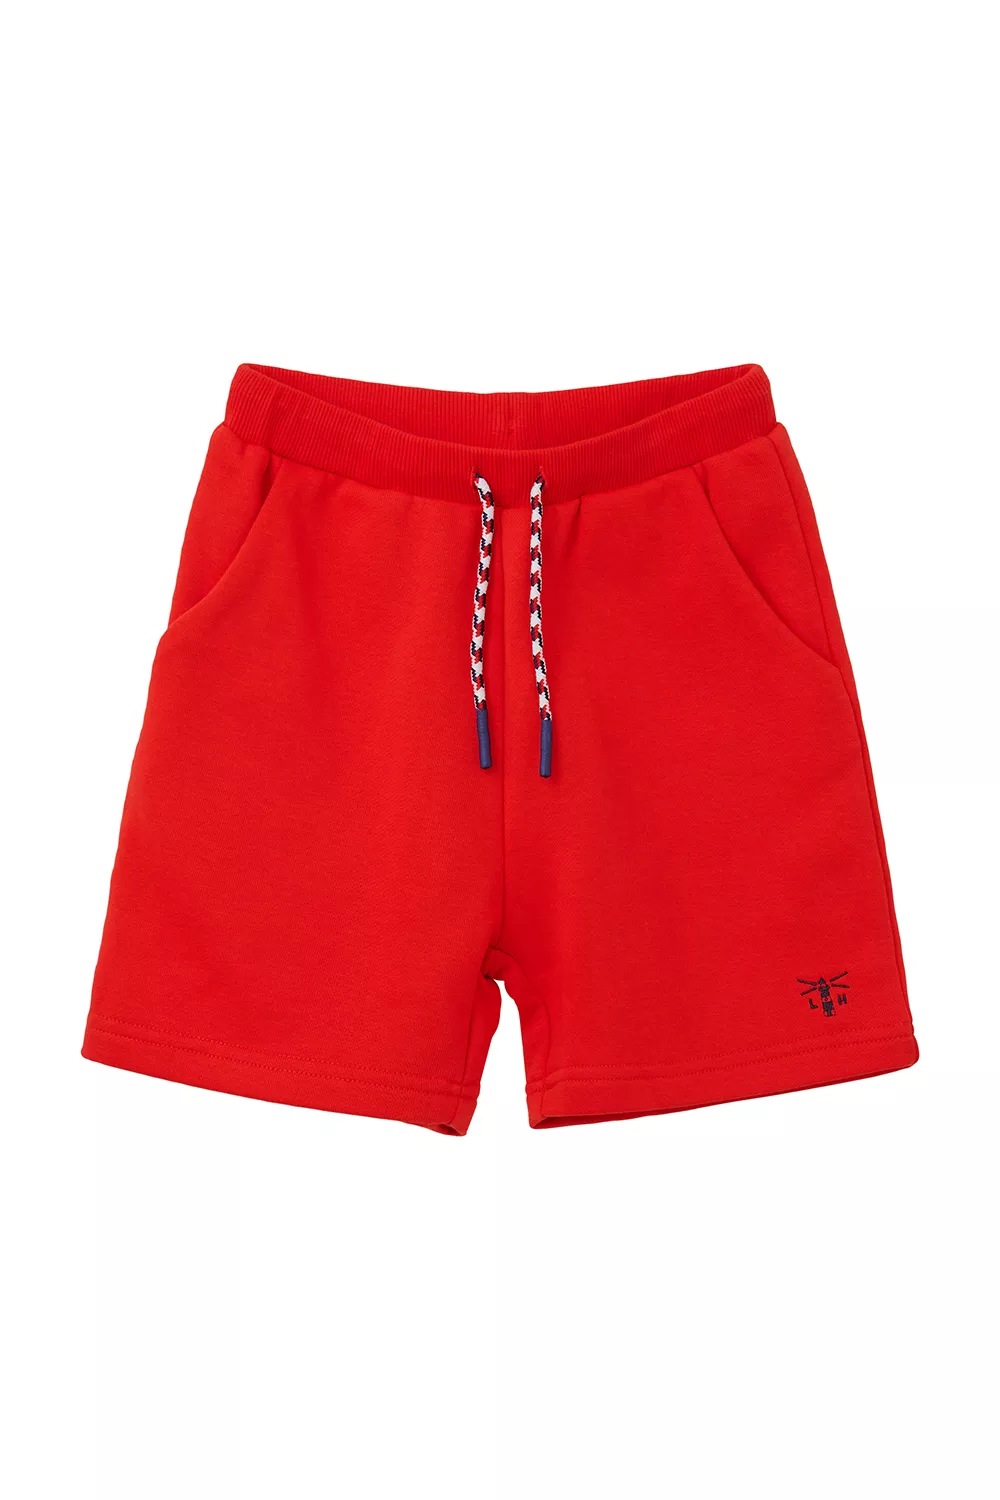 Louie Shorts Red 4-5yrs